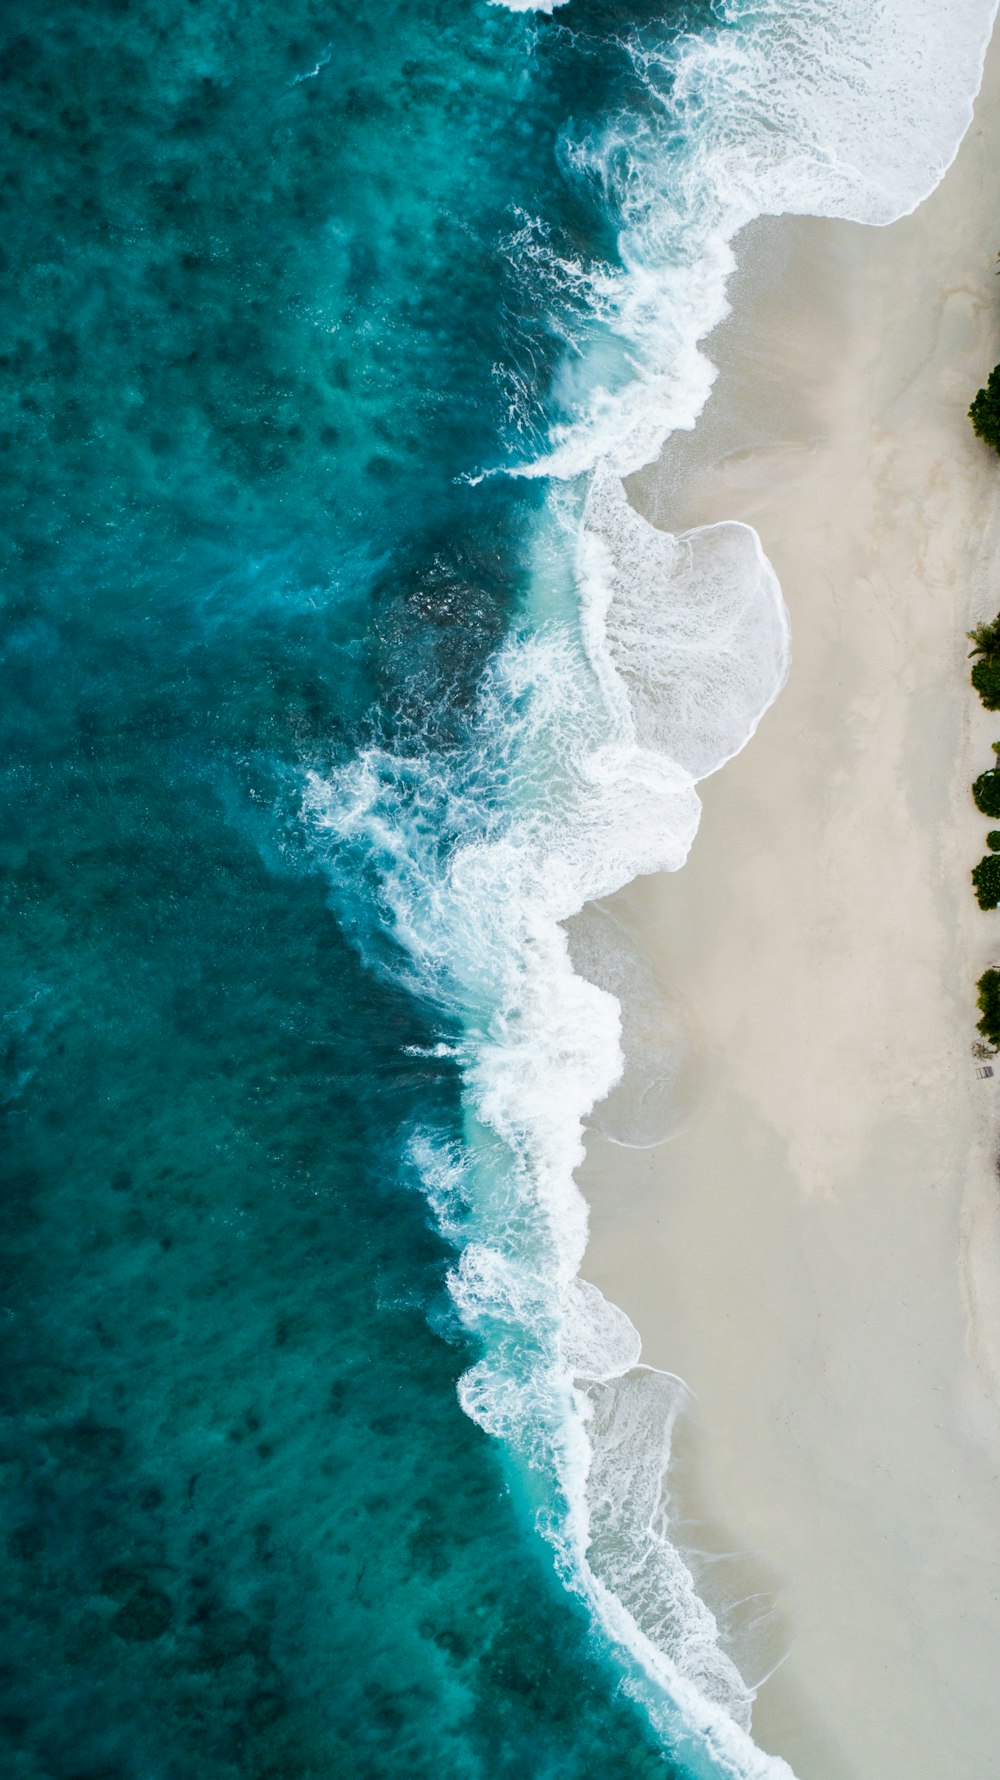 Iphone 11 Wallpaper Pictures | Download Free Images on Unsplash